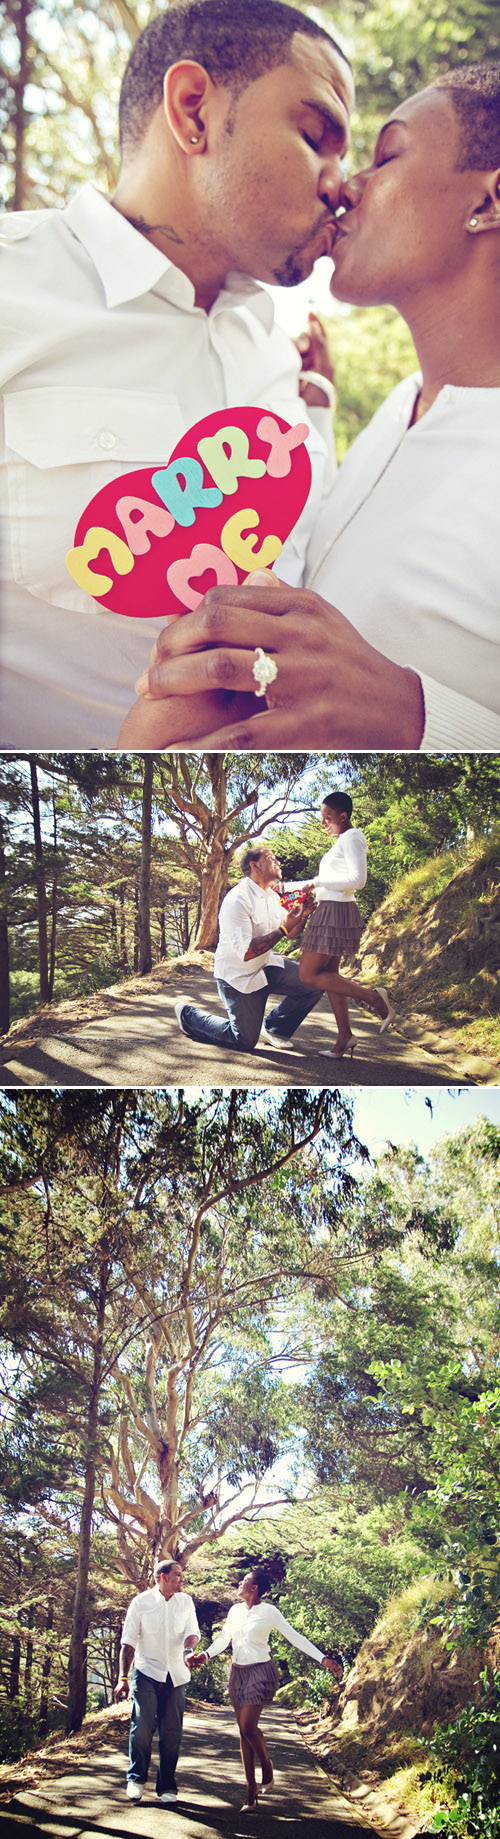 San Francisco marriage proposal and engagement photo shoot, images by Taken by Light Photography